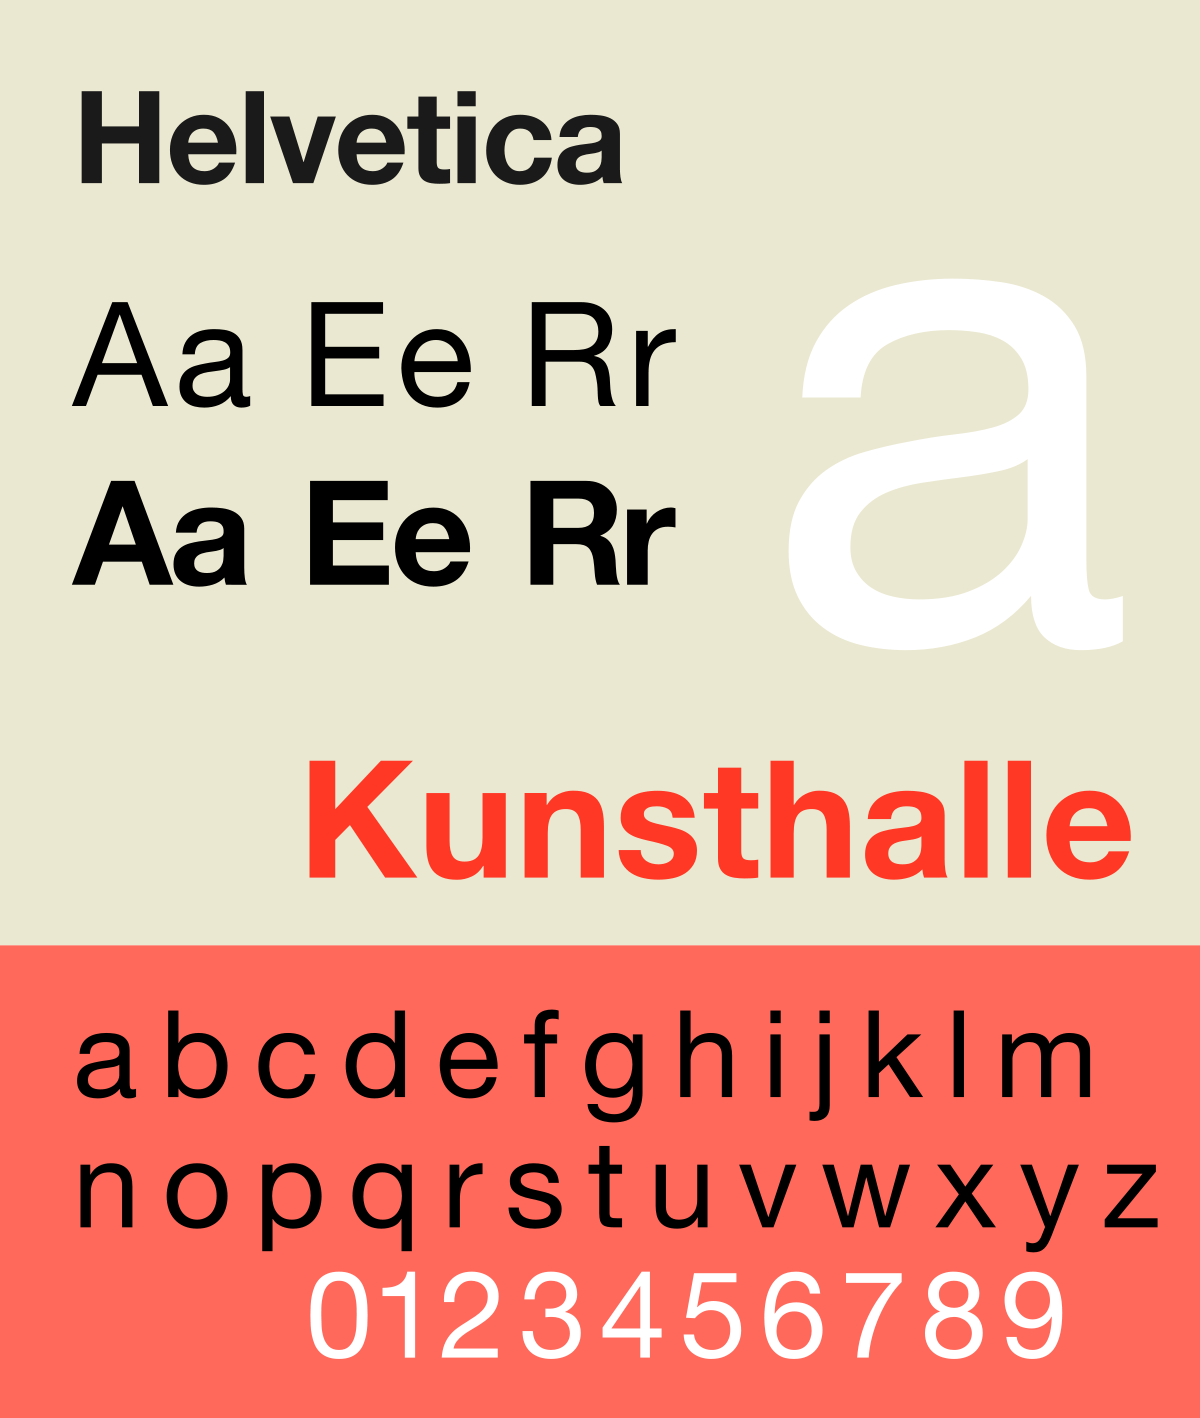 Helvetica font family free download for windows 7 free